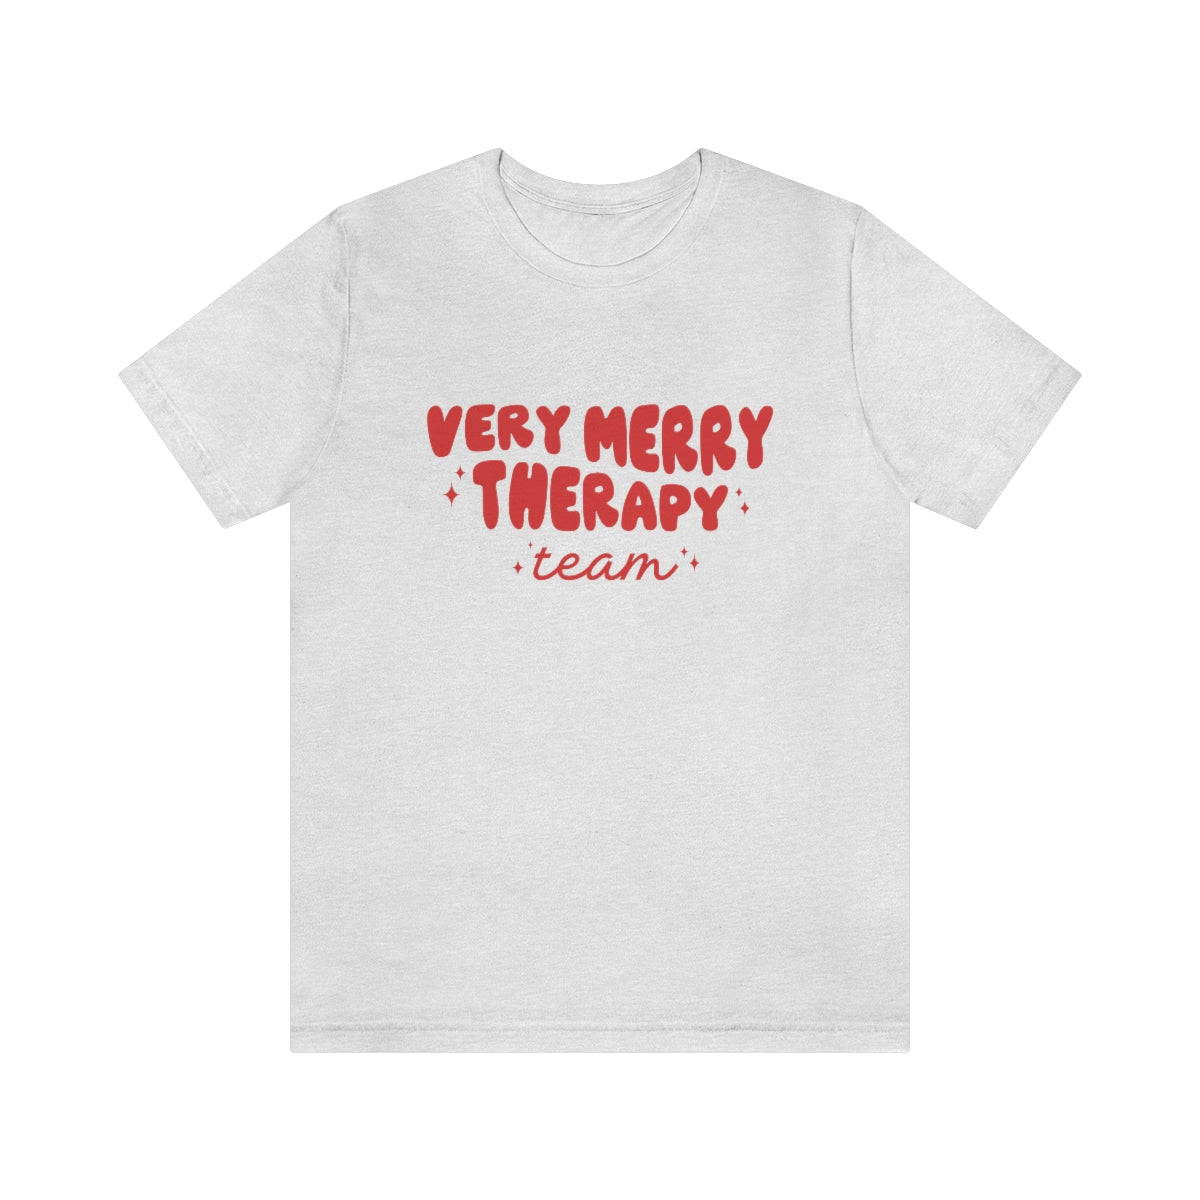 Very Merry Therapy Team Jersey T-Shirt